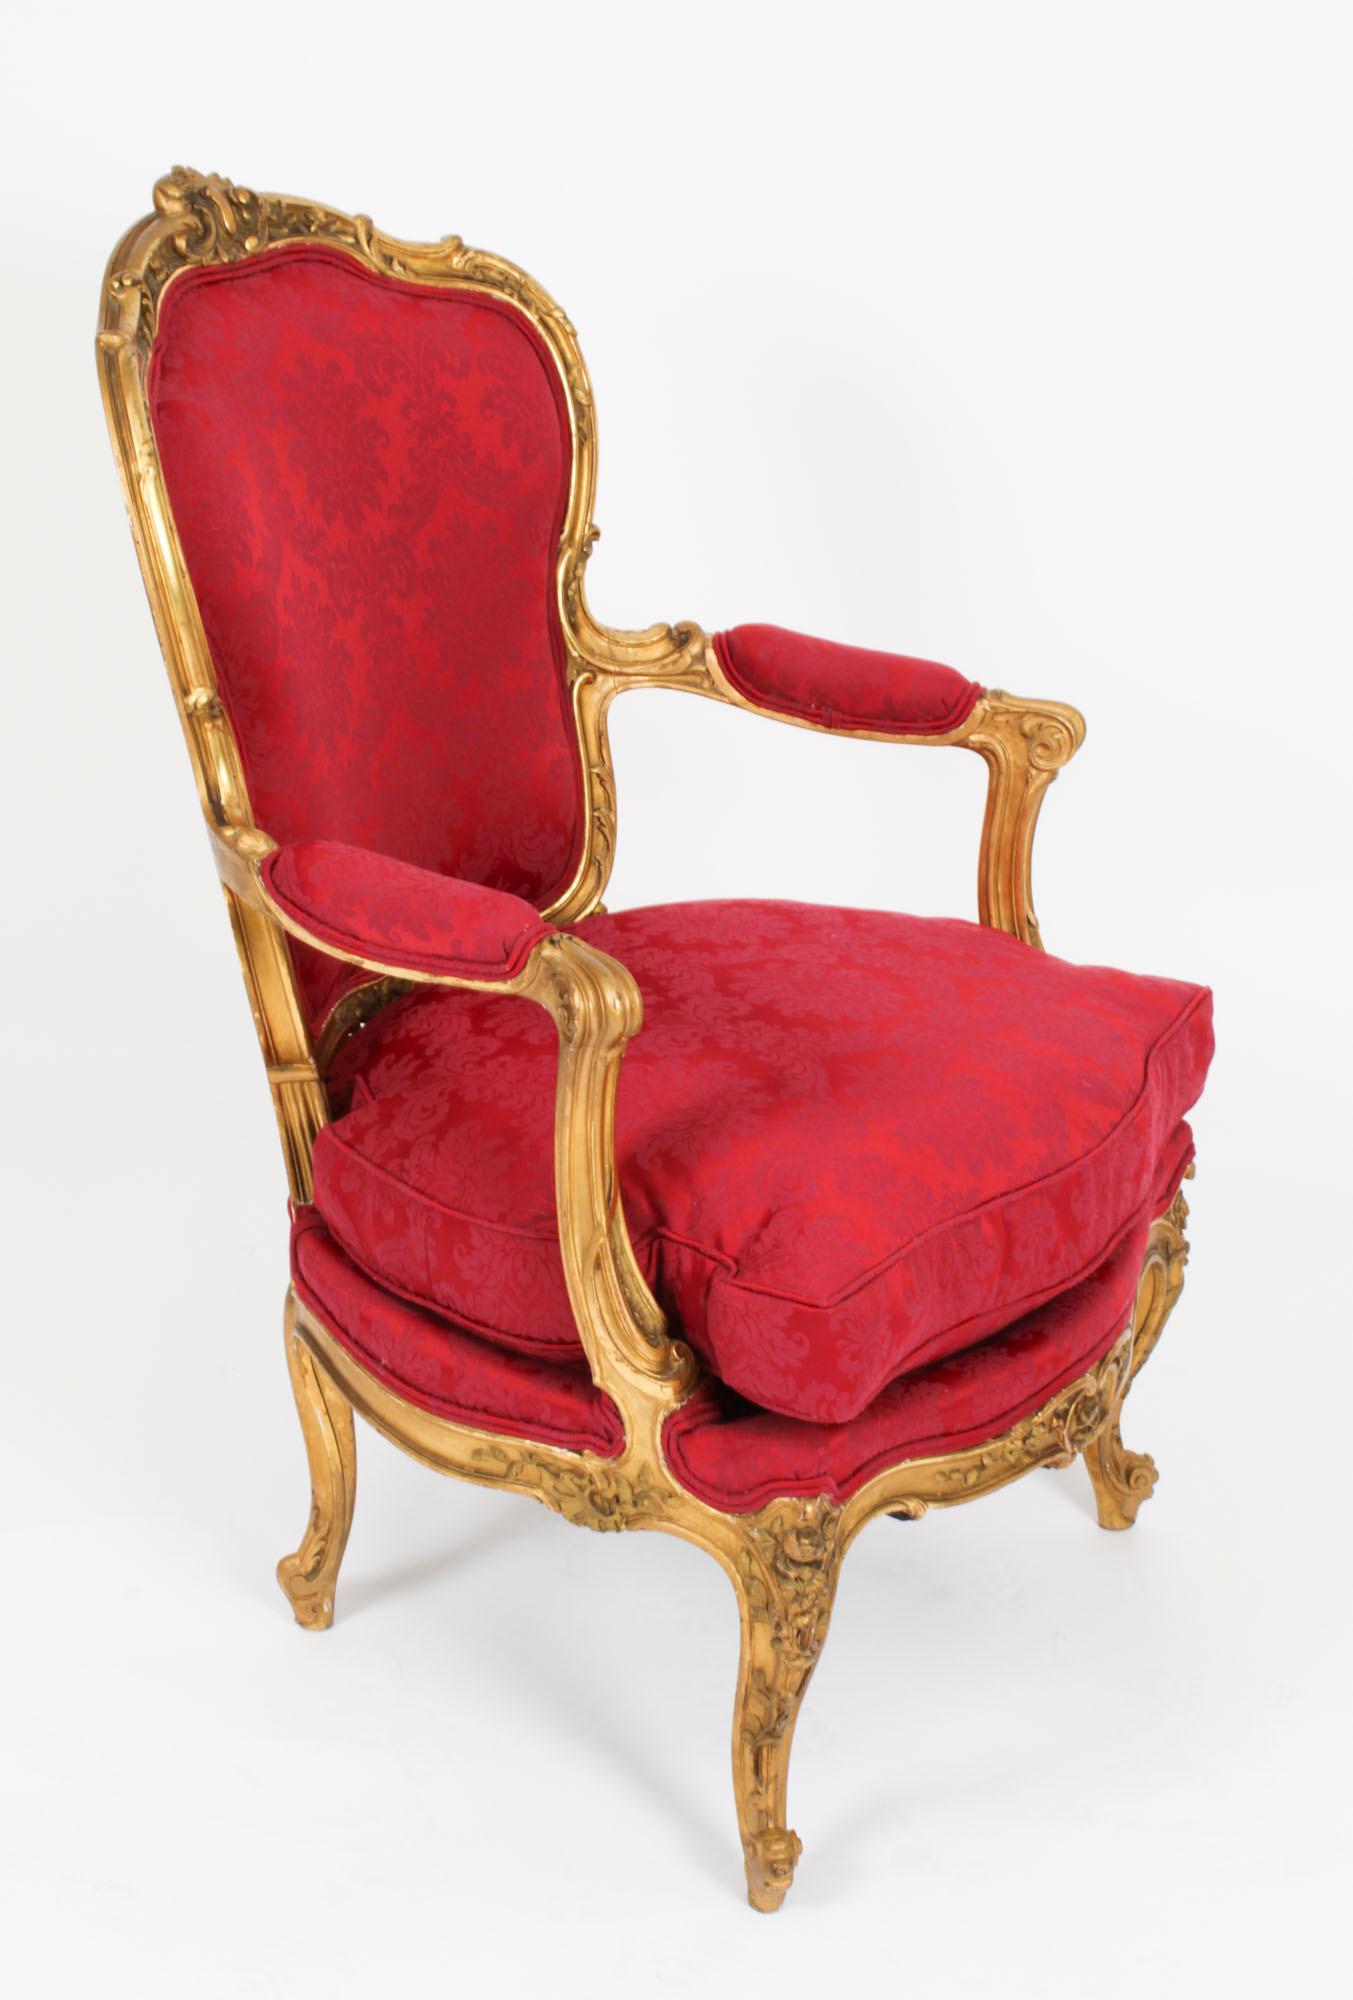 This is a beautiful antique pair of Louis XV Revival giltwood fauteiuls or open armchairs, circa 1880 in date. 
 
The original giltwood is beautiful in colour, each chair features a floral carved crested toprail with acanthus clasped arm padded